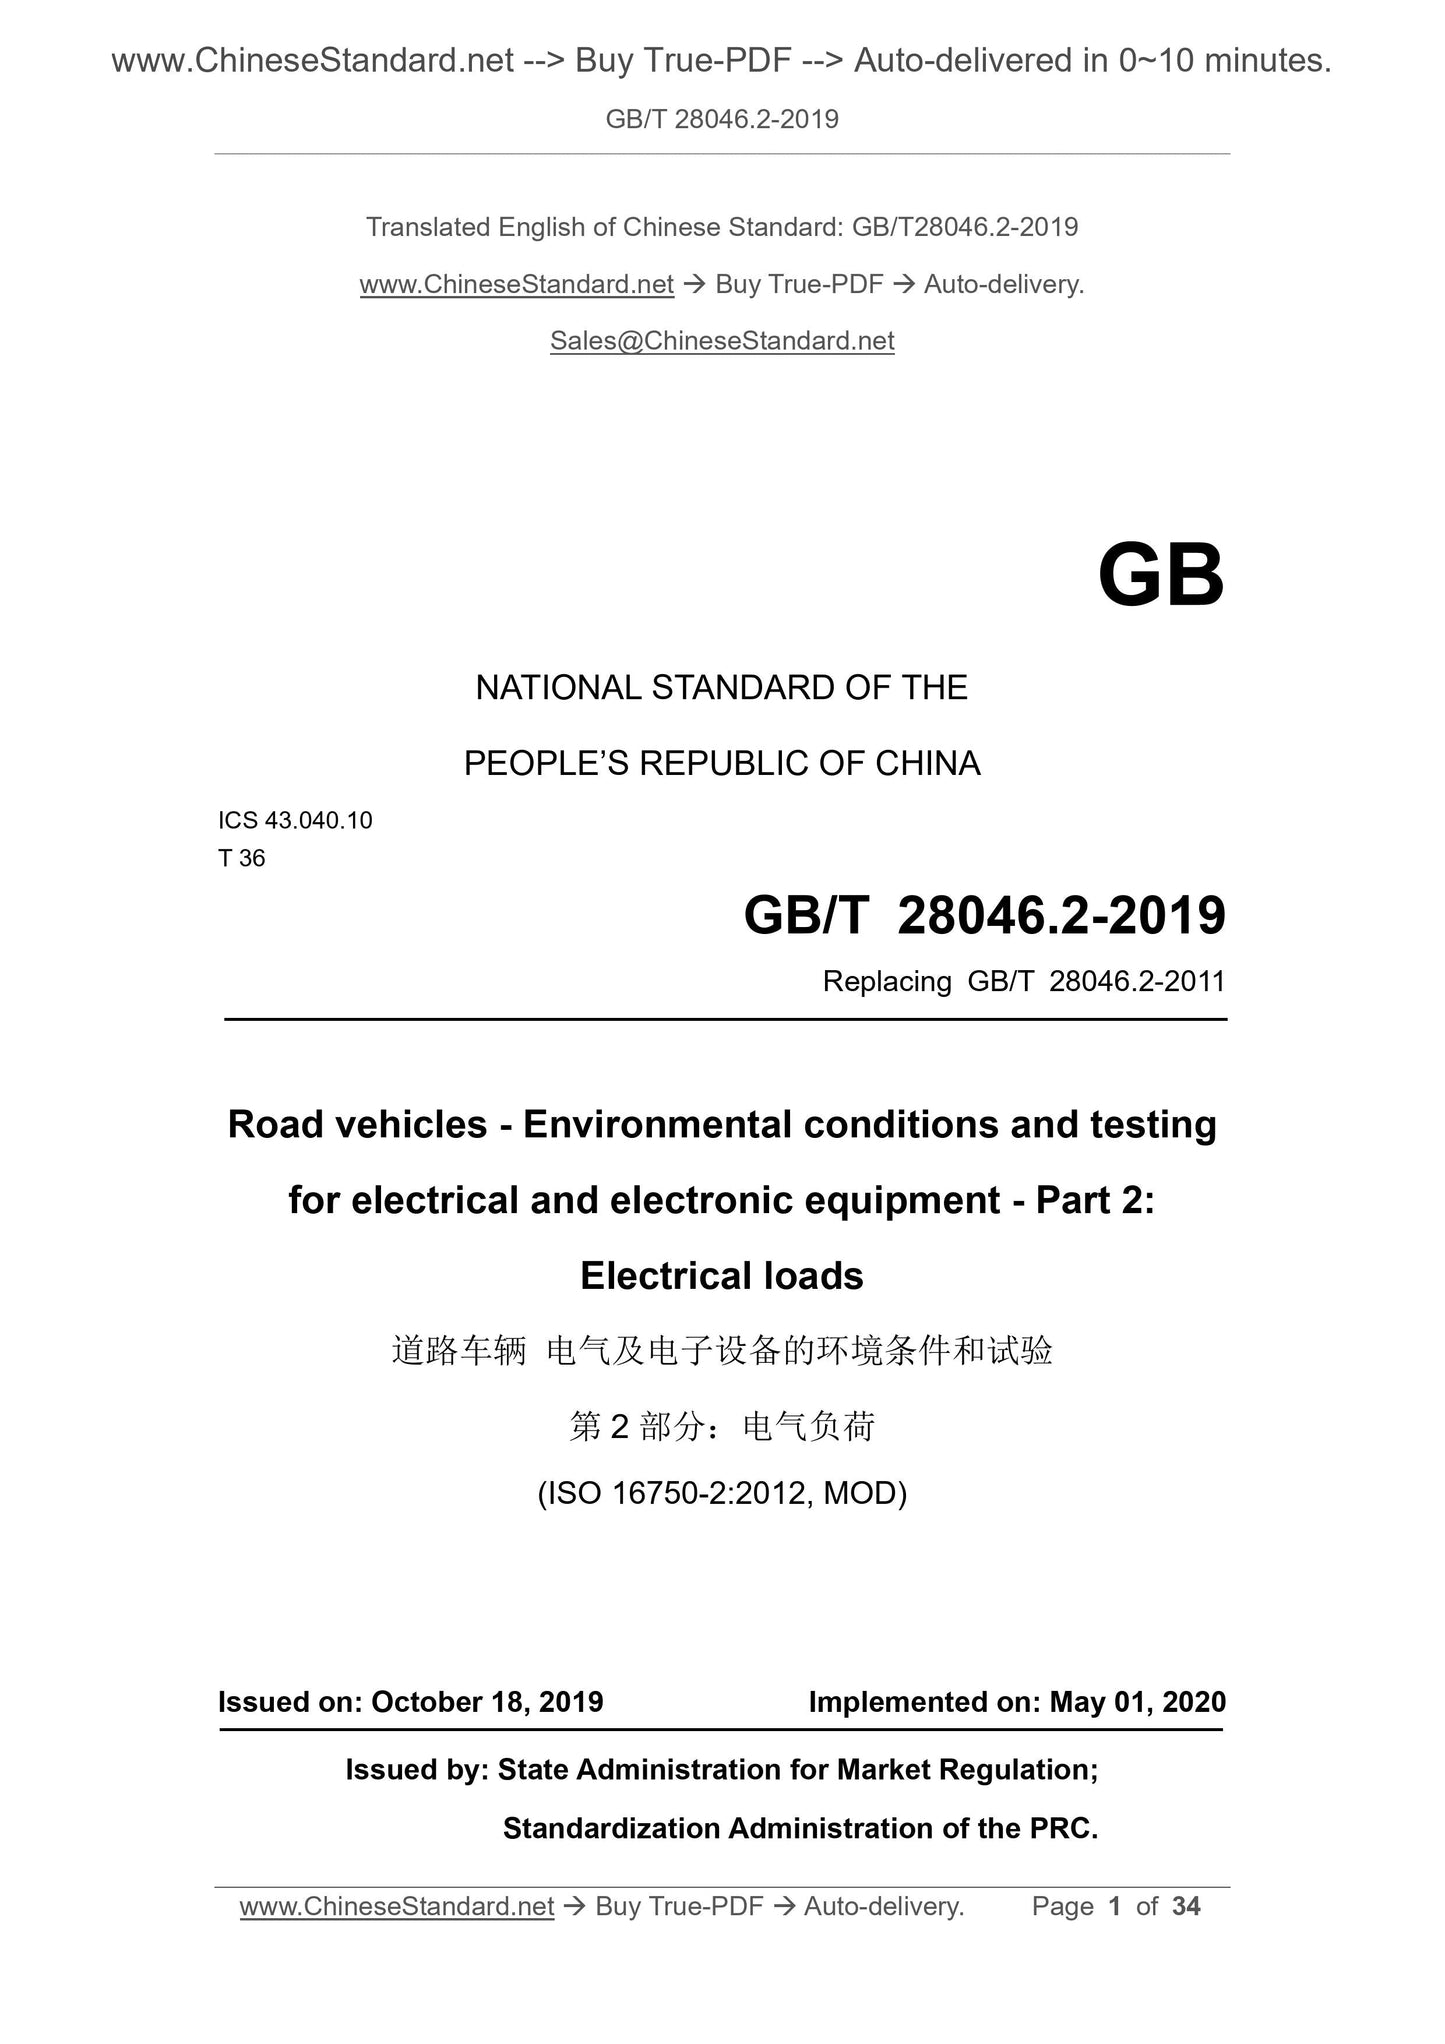 GB/T 28046.2-2019 Page 1